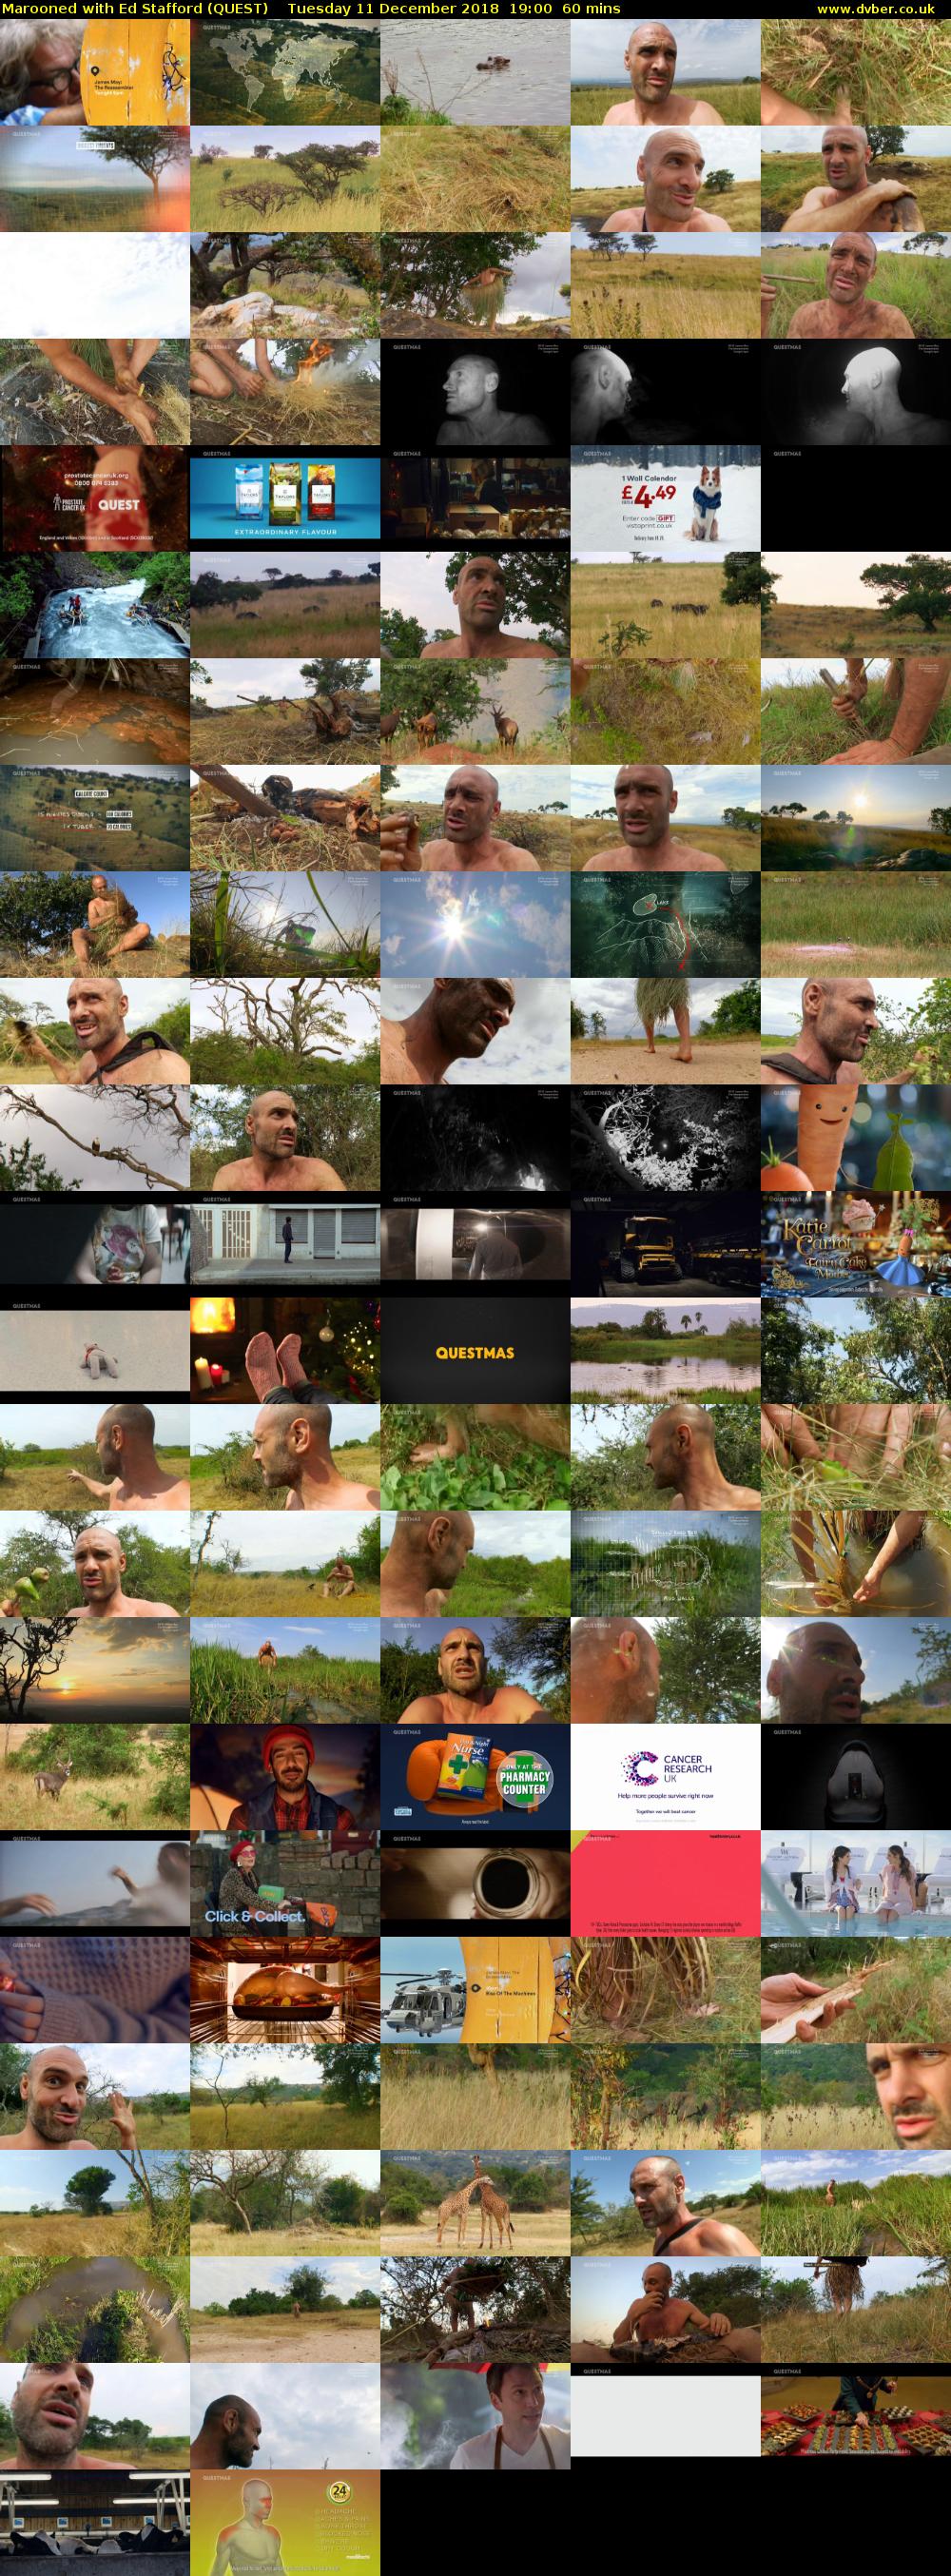 Marooned with Ed Stafford (QUEST) Tuesday 11 December 2018 19:00 - 20:00